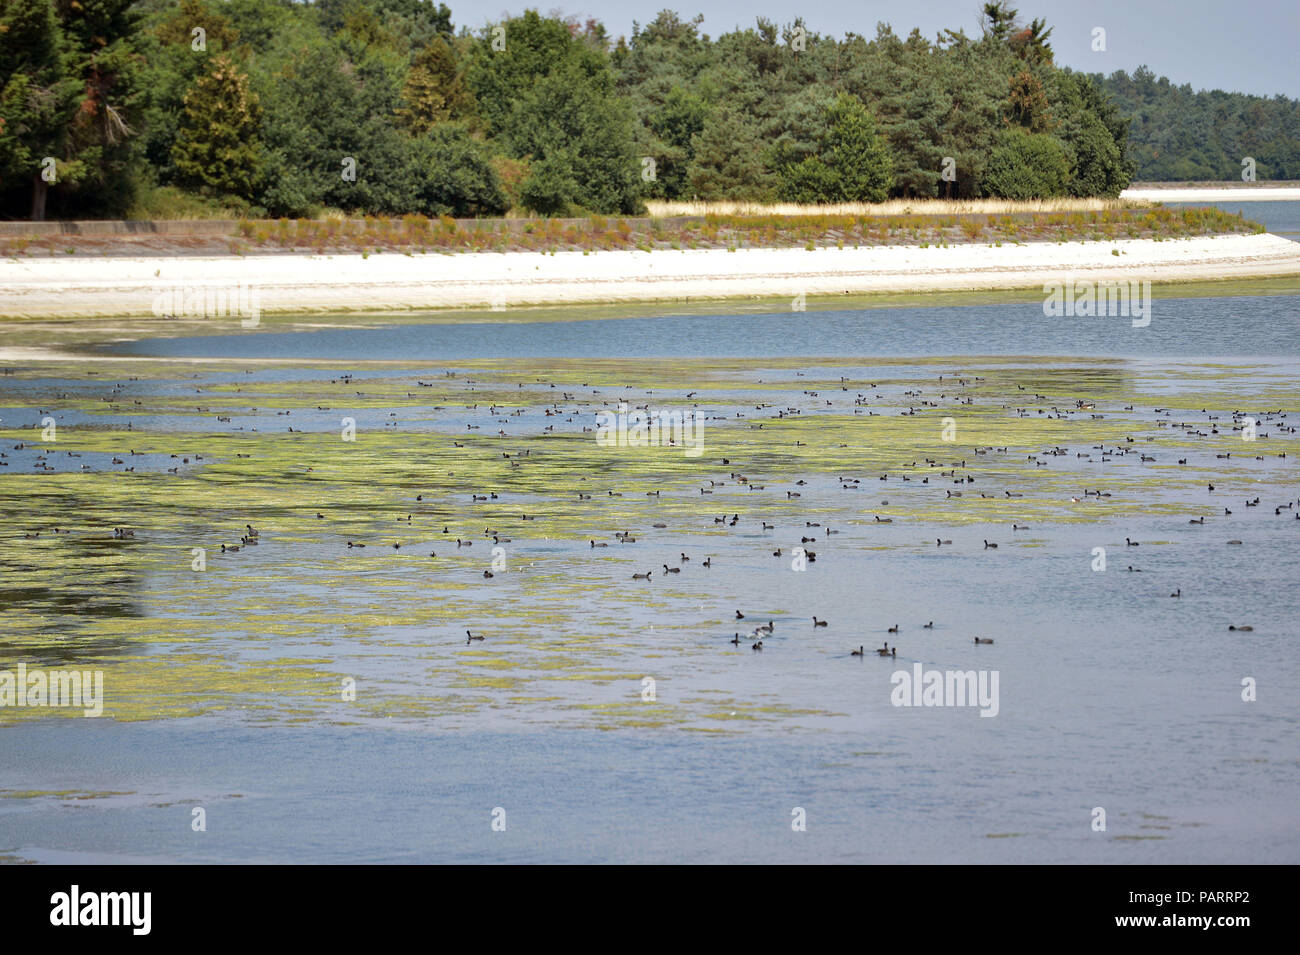 Very low water levels at Hanningfield reservoir, near Chelmsford in Essex, as the hot weather continues across the country. Stock Photo